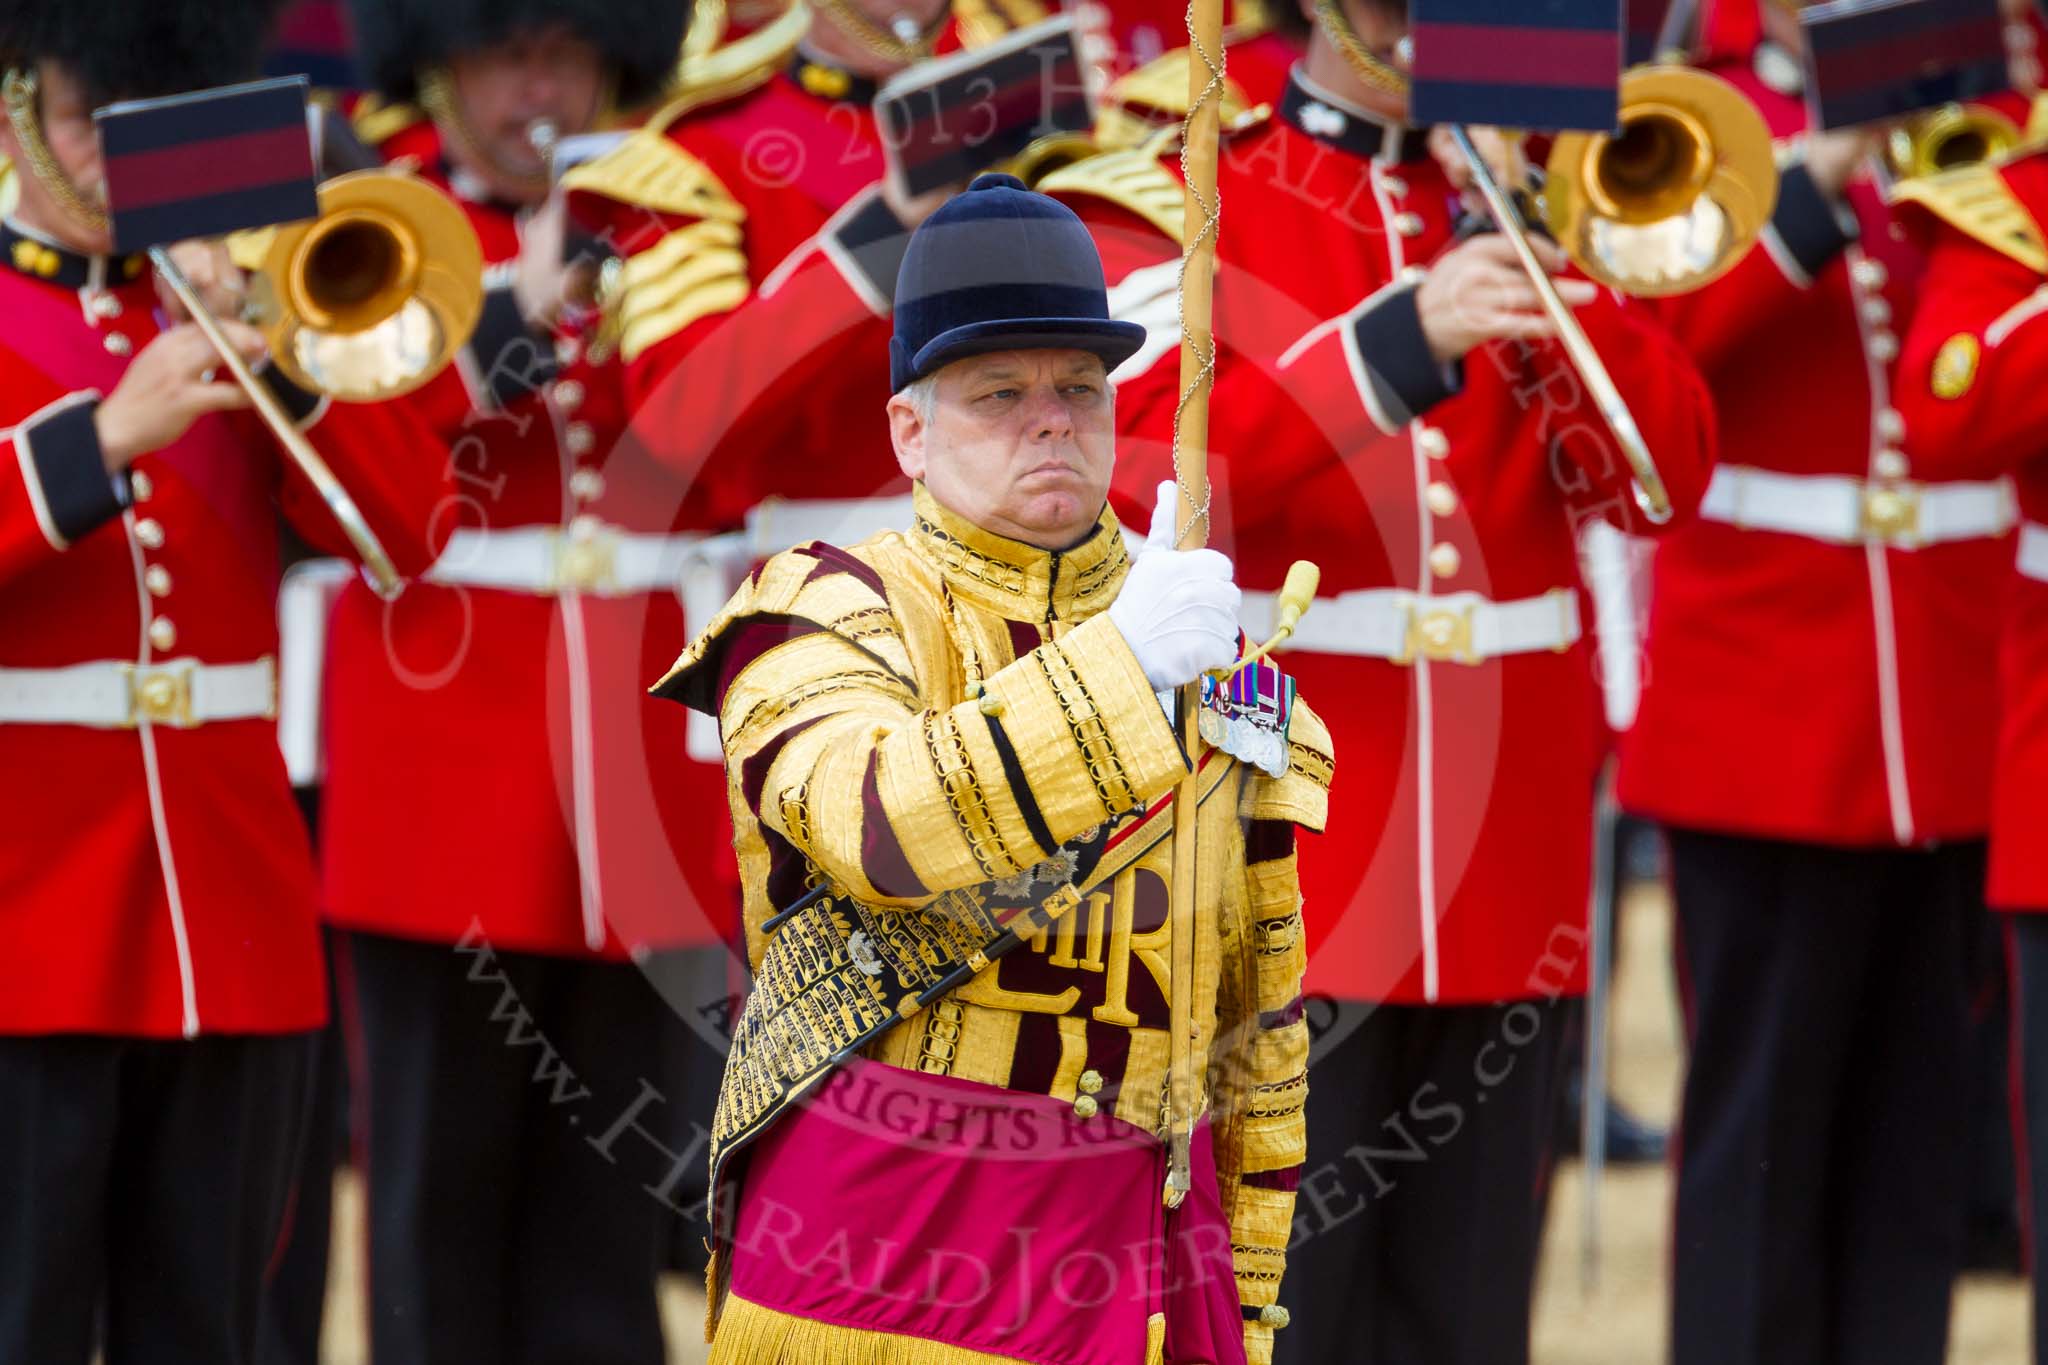 The Colonel's Review 2015.
Horse Guards Parade, Westminster,
London,

United Kingdom,
on 06 June 2015 at 11:37, image #398